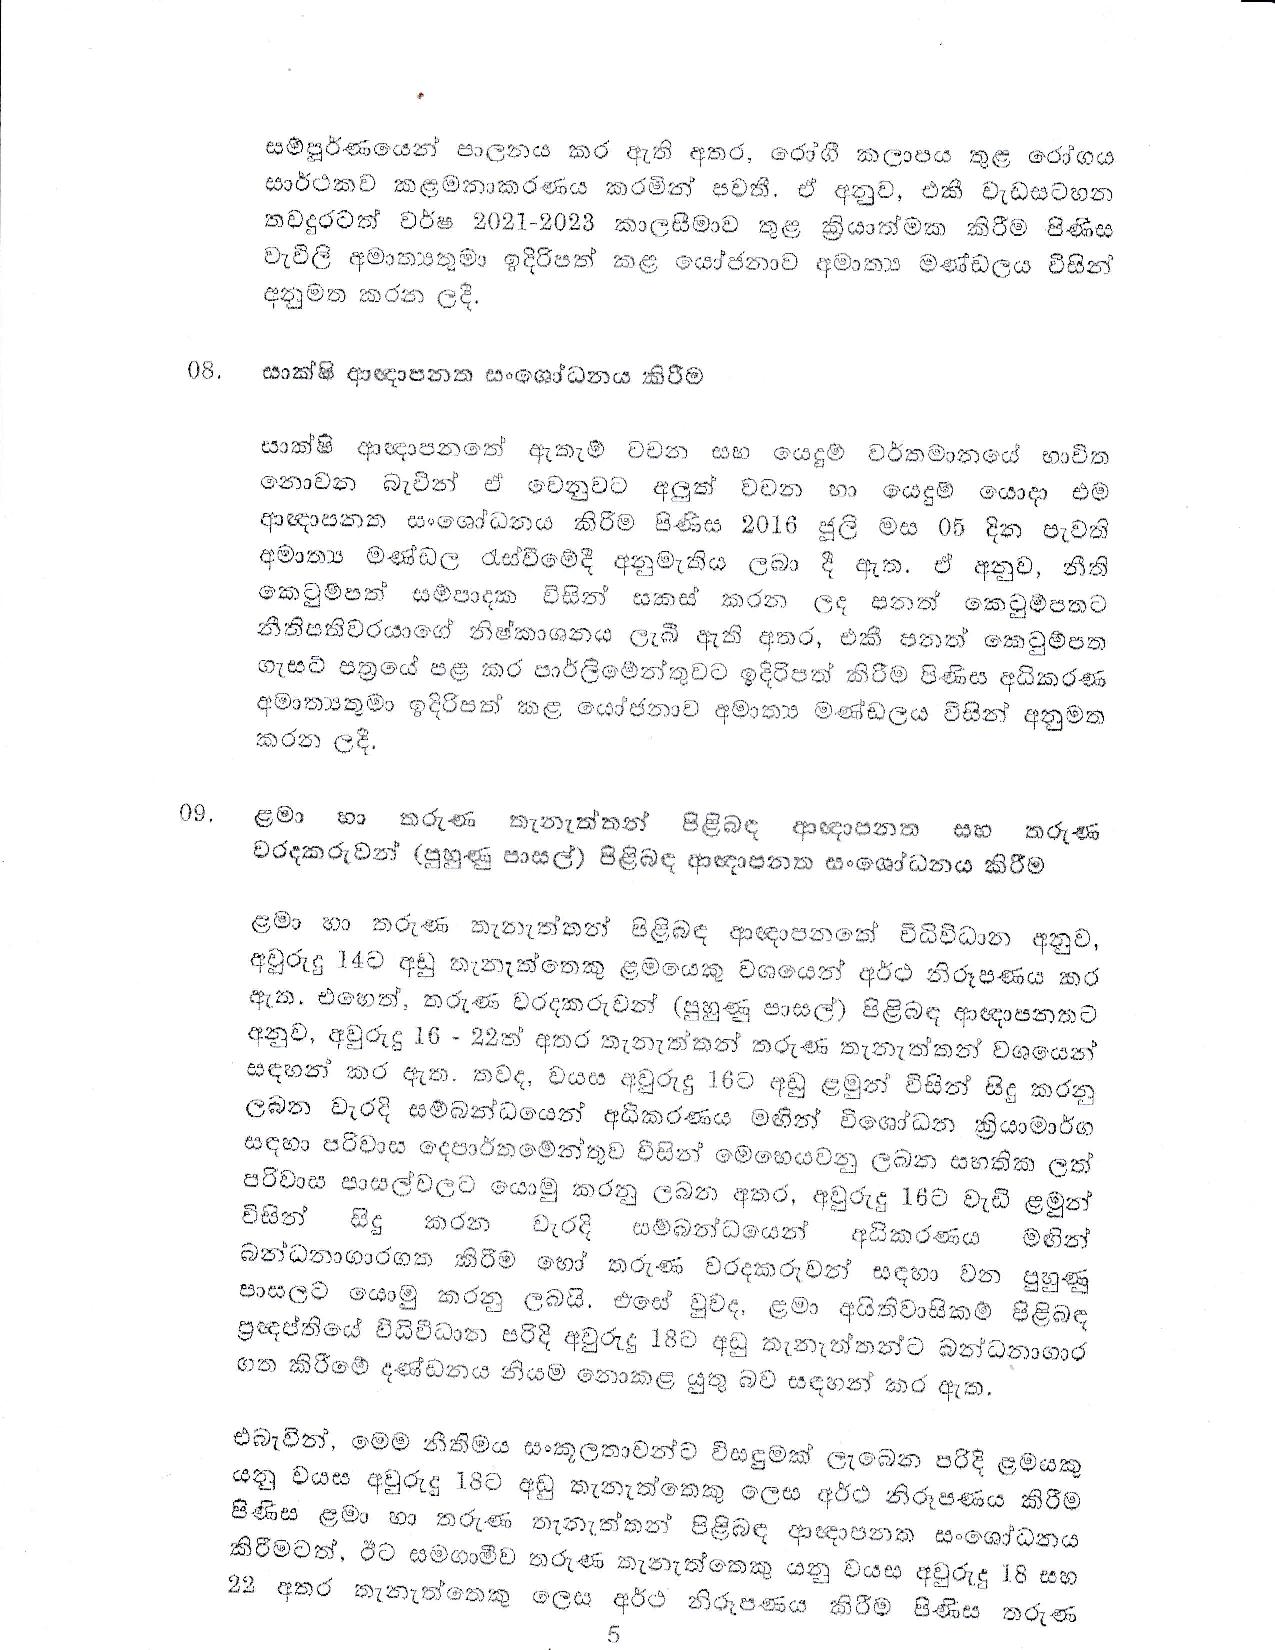 Cabinet Decision on 16.09.2020 page 005